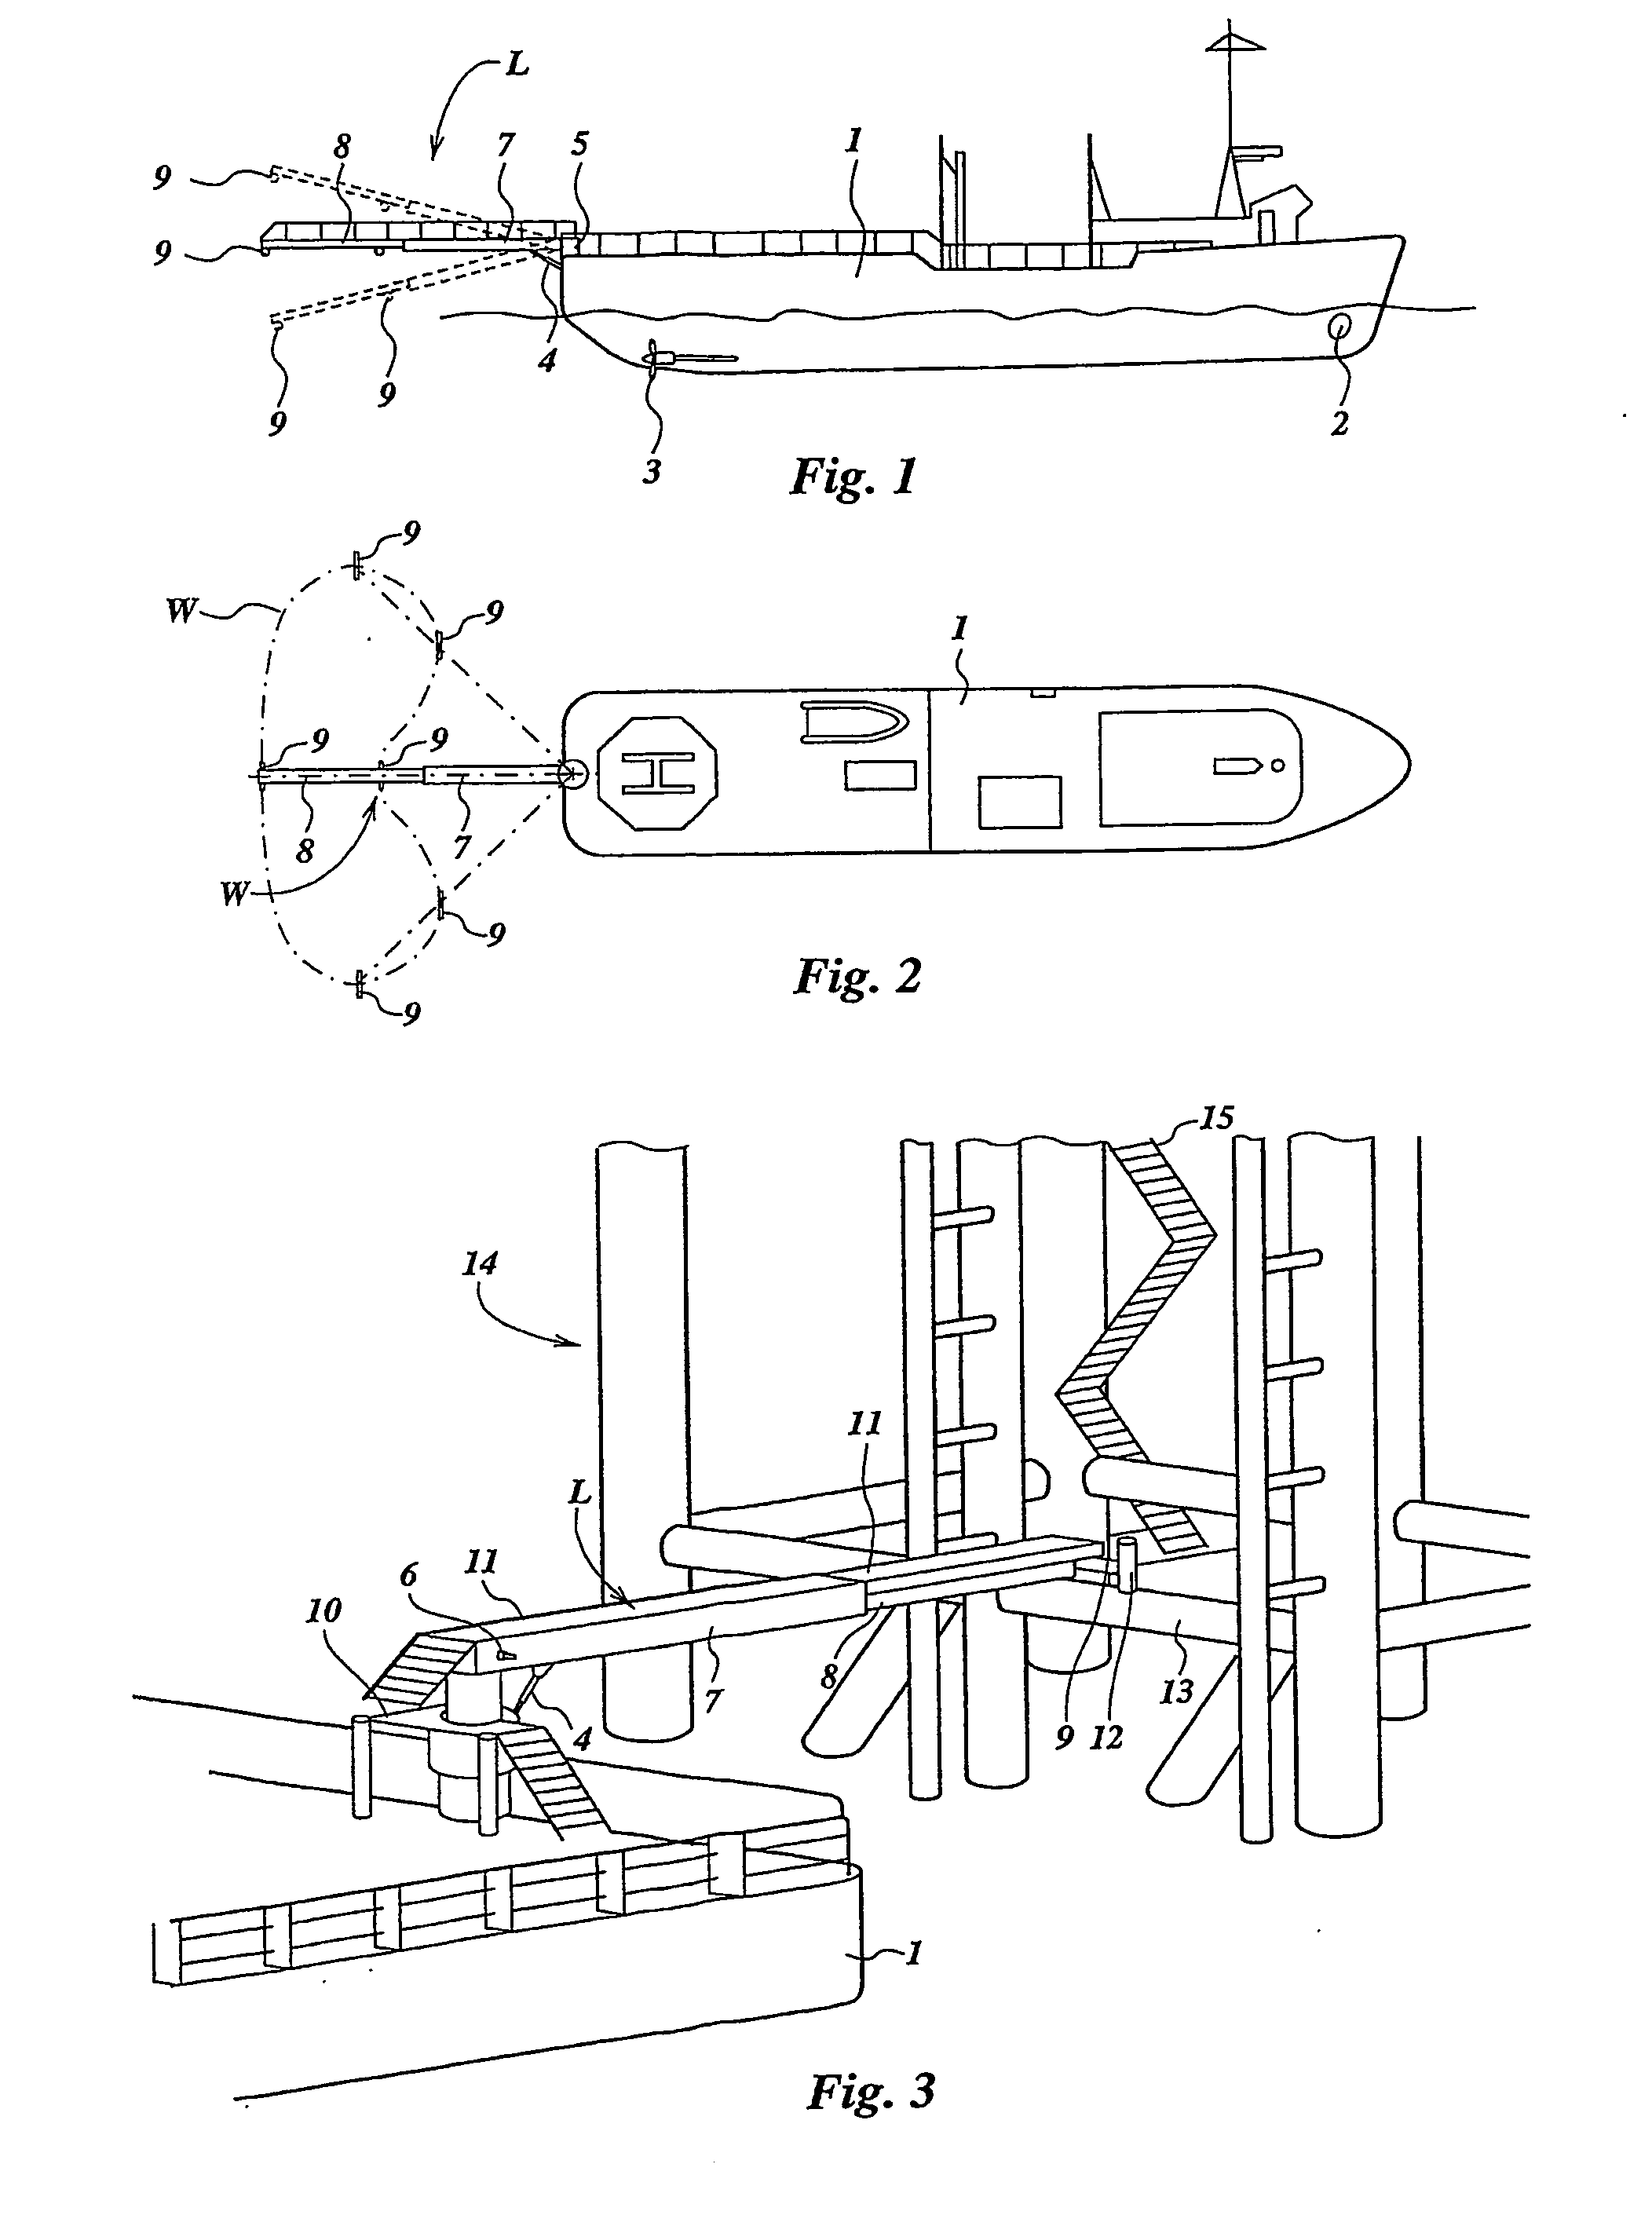 Device and Method for Coupling a Vessel to a Stationary Object